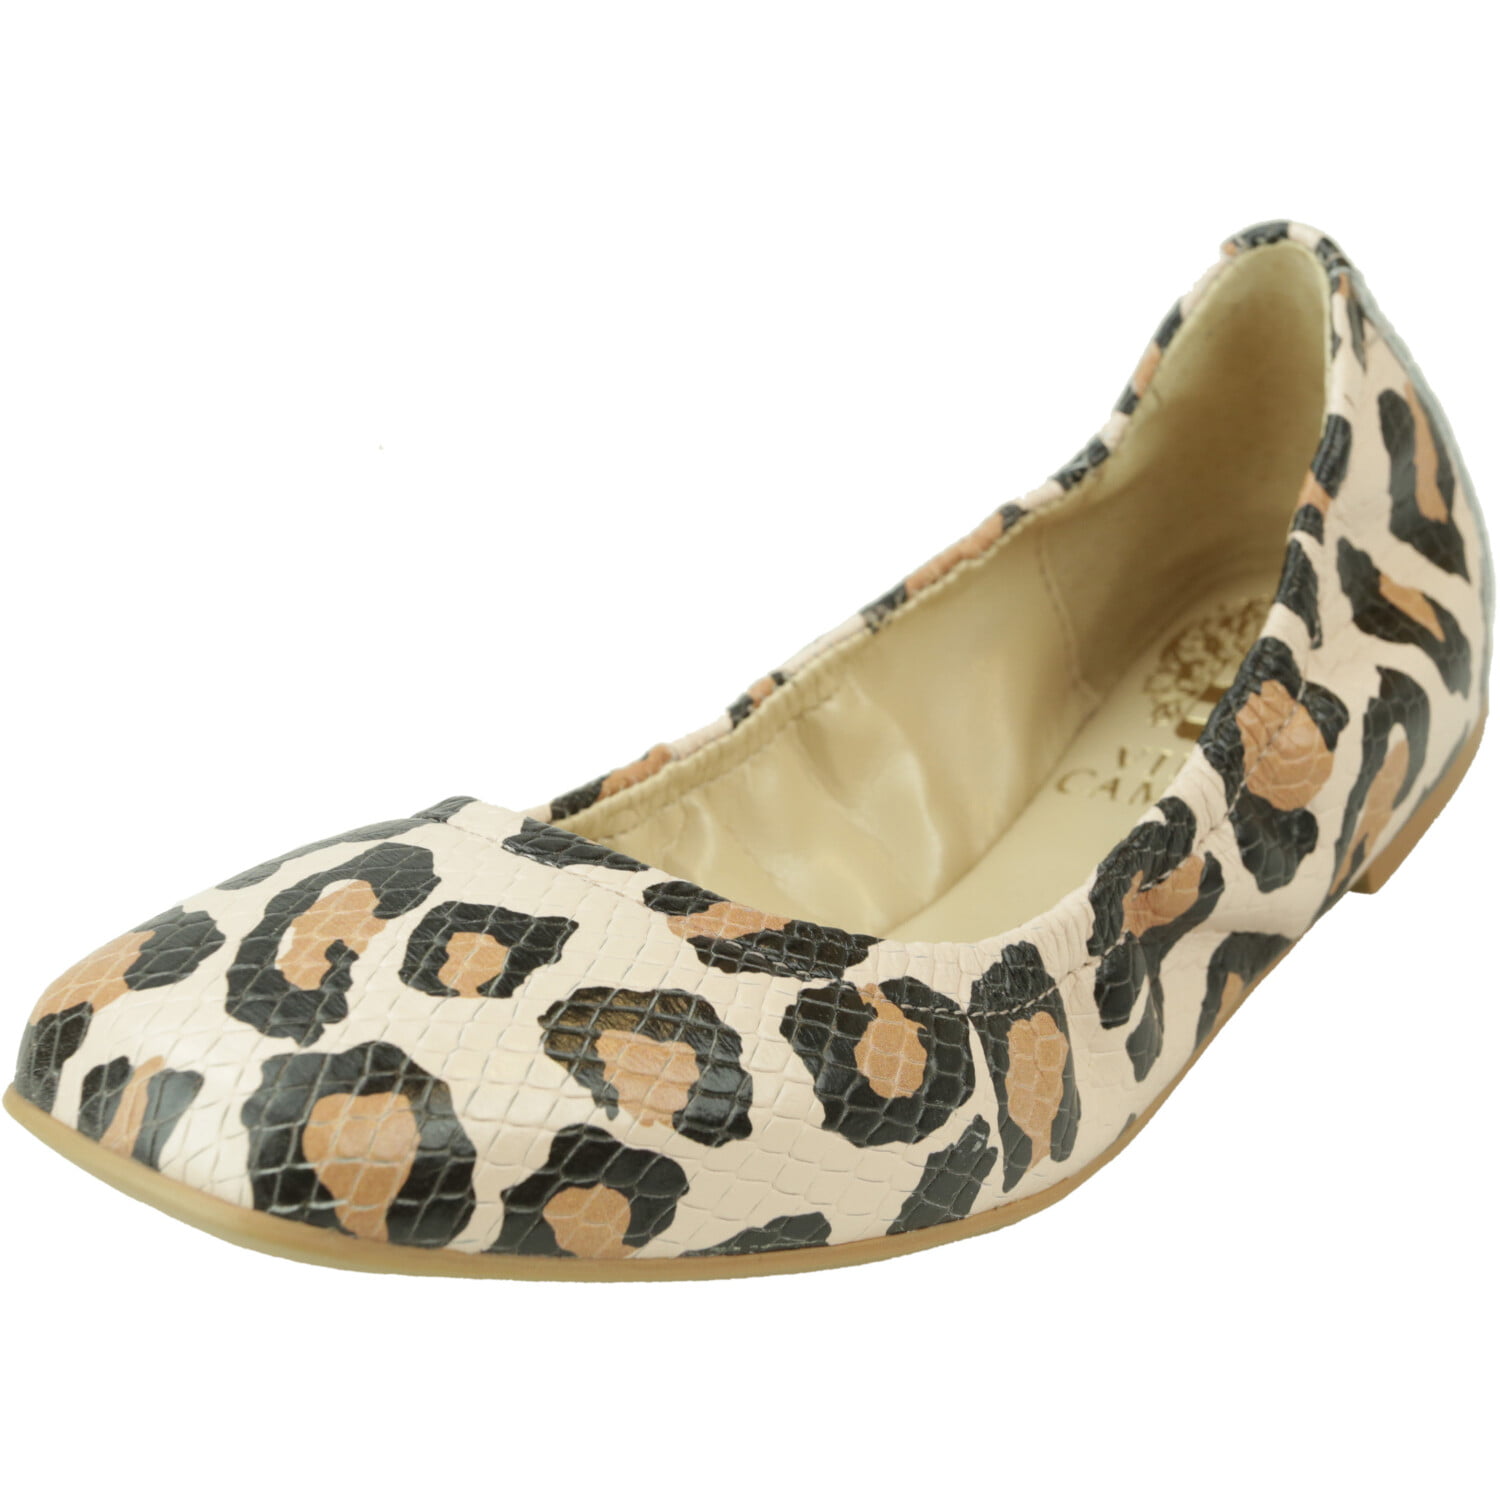 vince camuto flat shoes